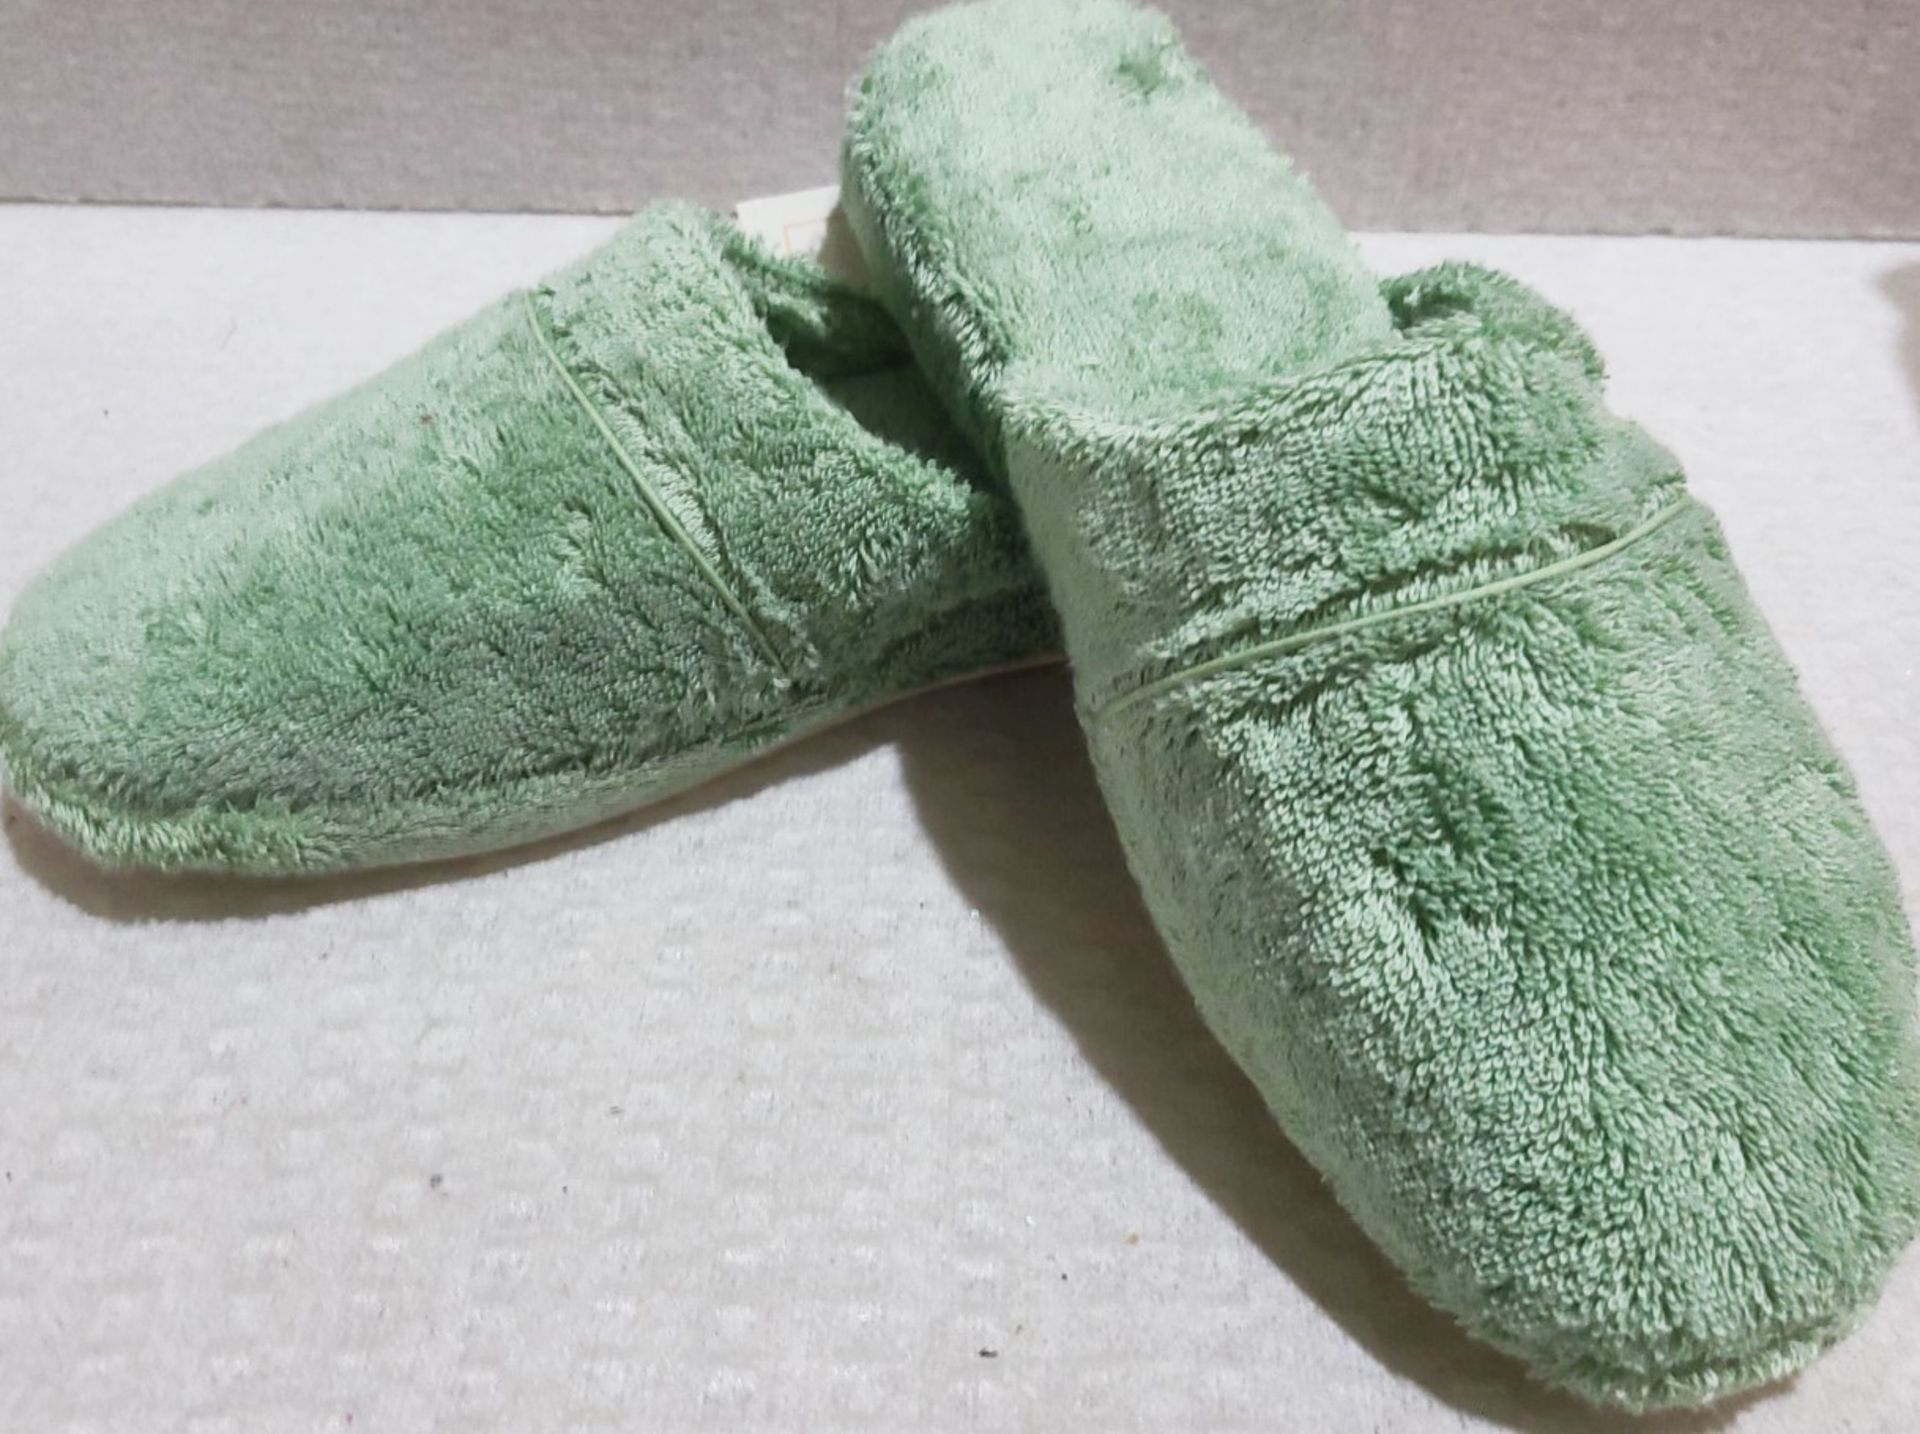 1 x PRATESI Panofole Sage Green Terry Cotton Slippers Size 40/41- RRP: £200.00 - Image 4 of 4